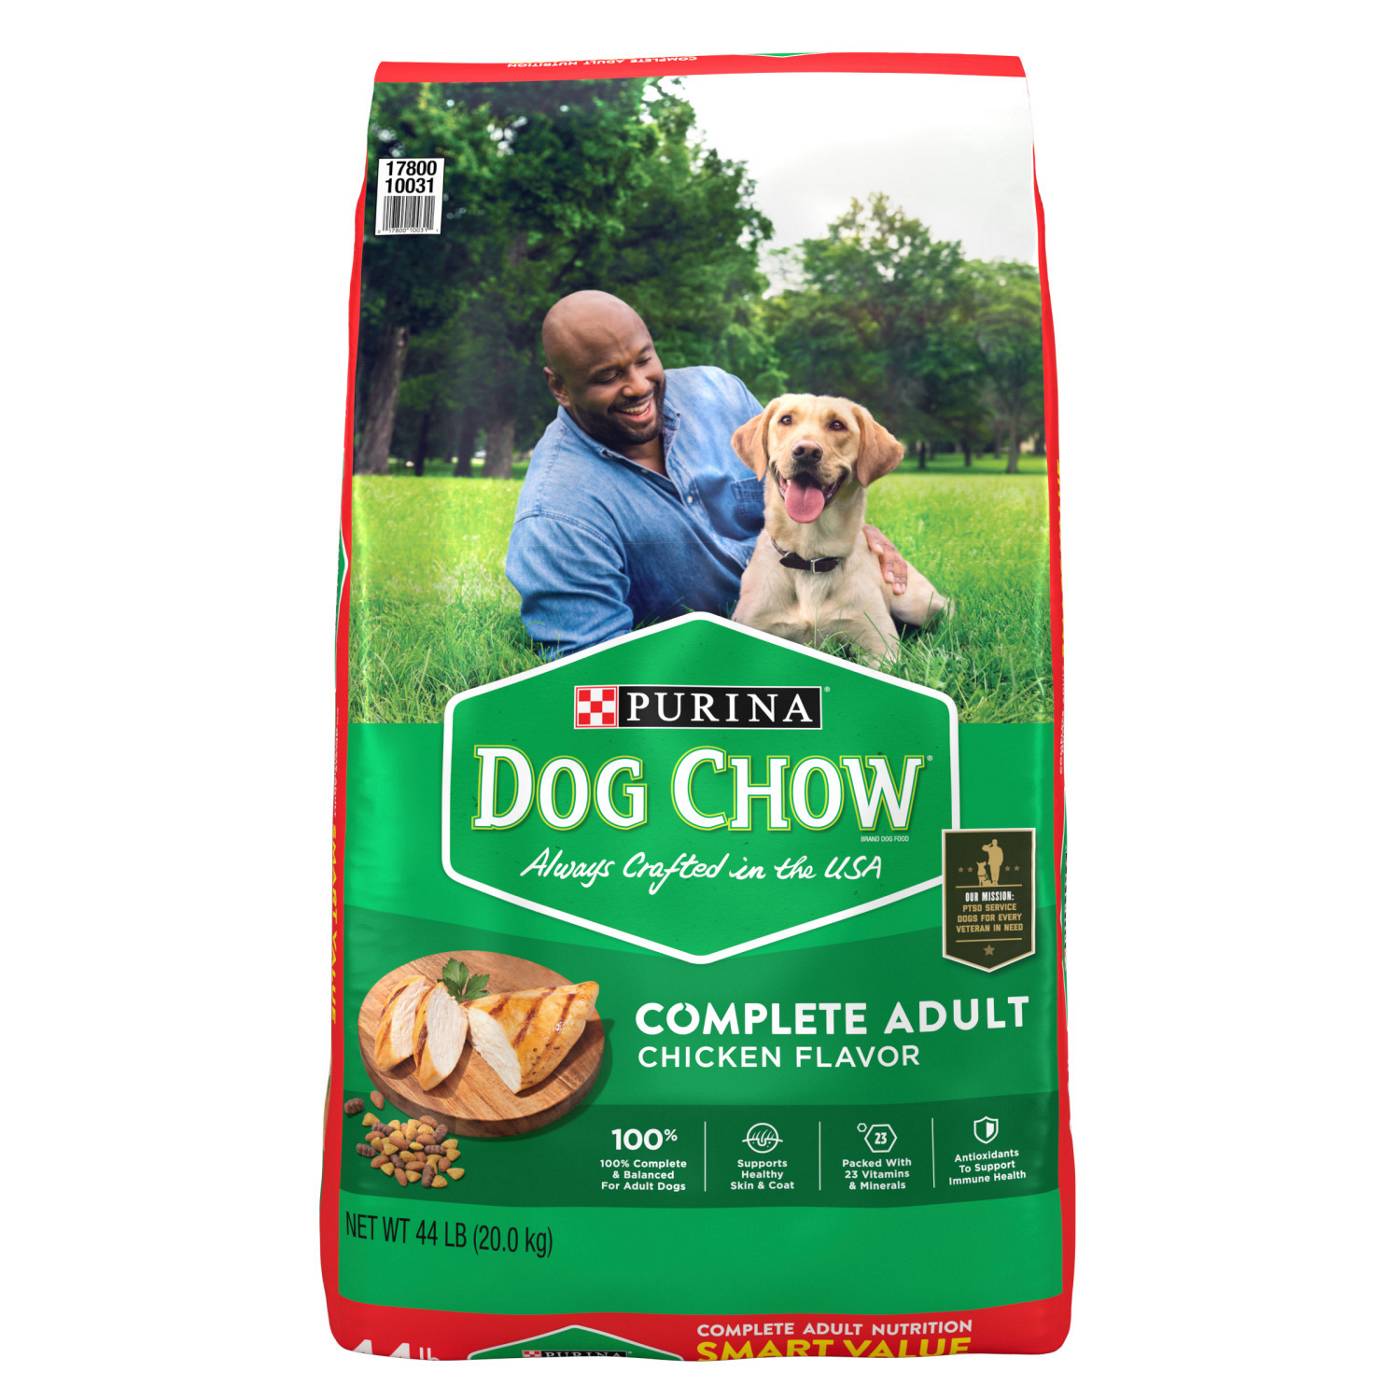 Dog Chow Purina Dog Chow Complete Adult Dry Dog Food Kibble With Chicken Flavor; image 1 of 5